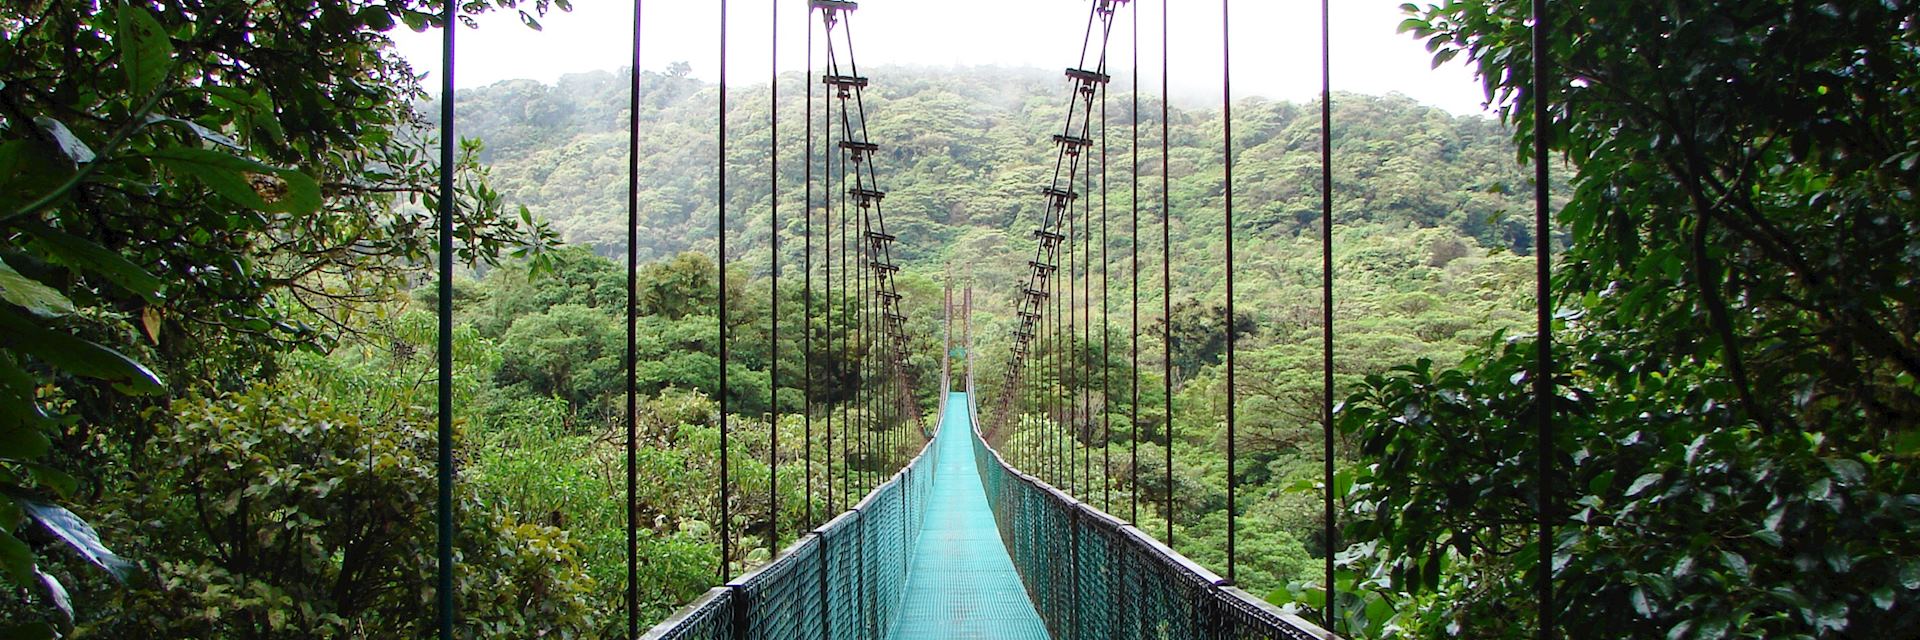 Selvatura Walkways and Canopy Zip-lining, Costa Rica | Audley Travel UK